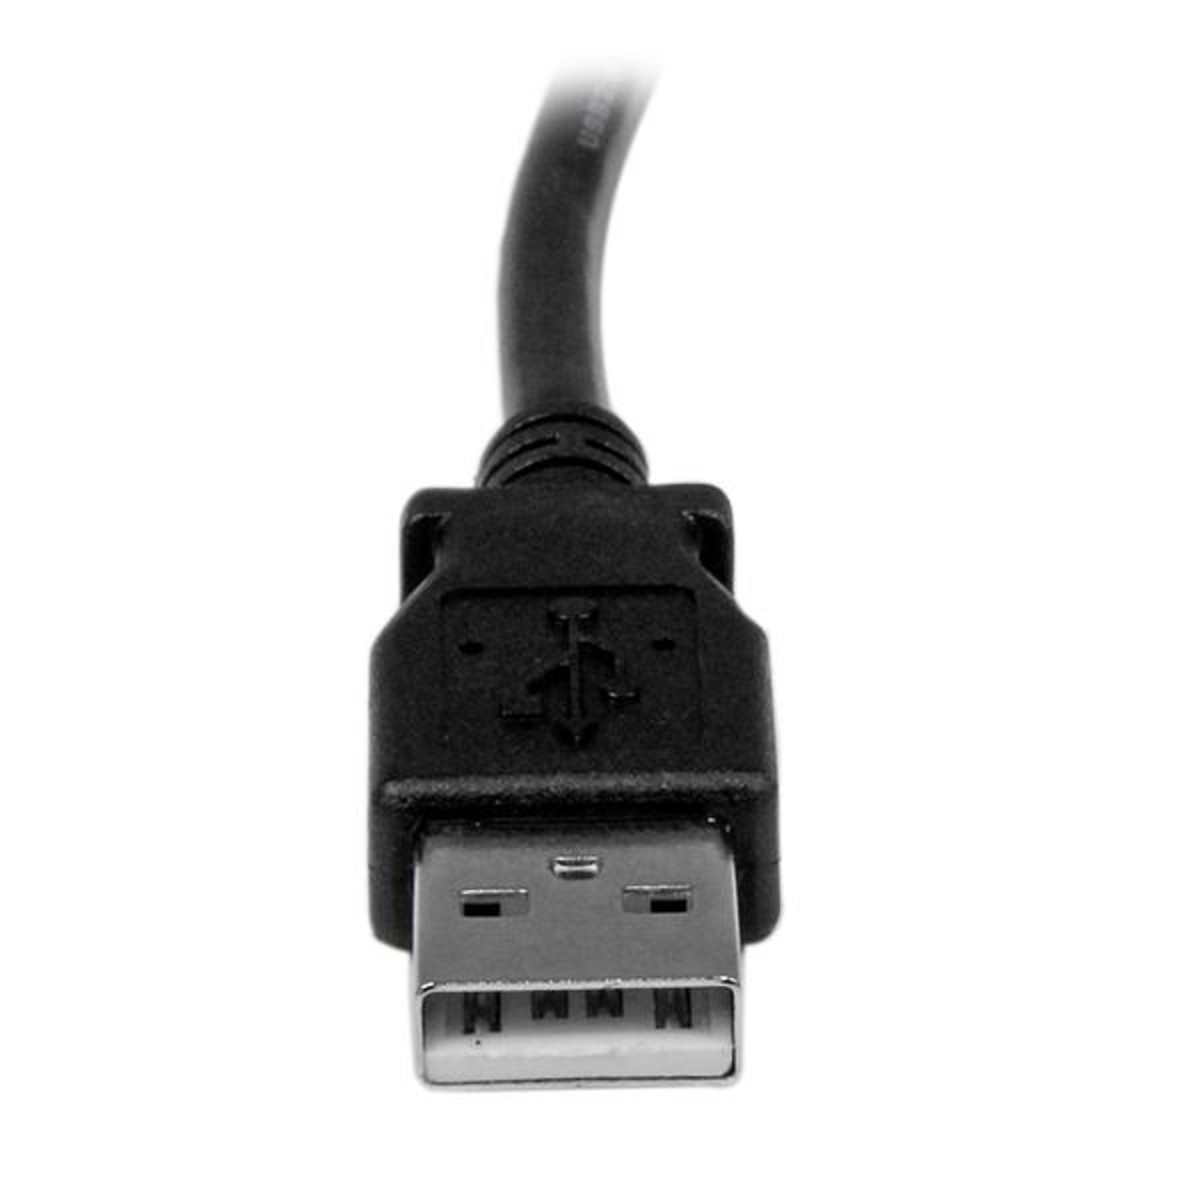 2m USB 2.0 A to Left Angle B Cable - M/M